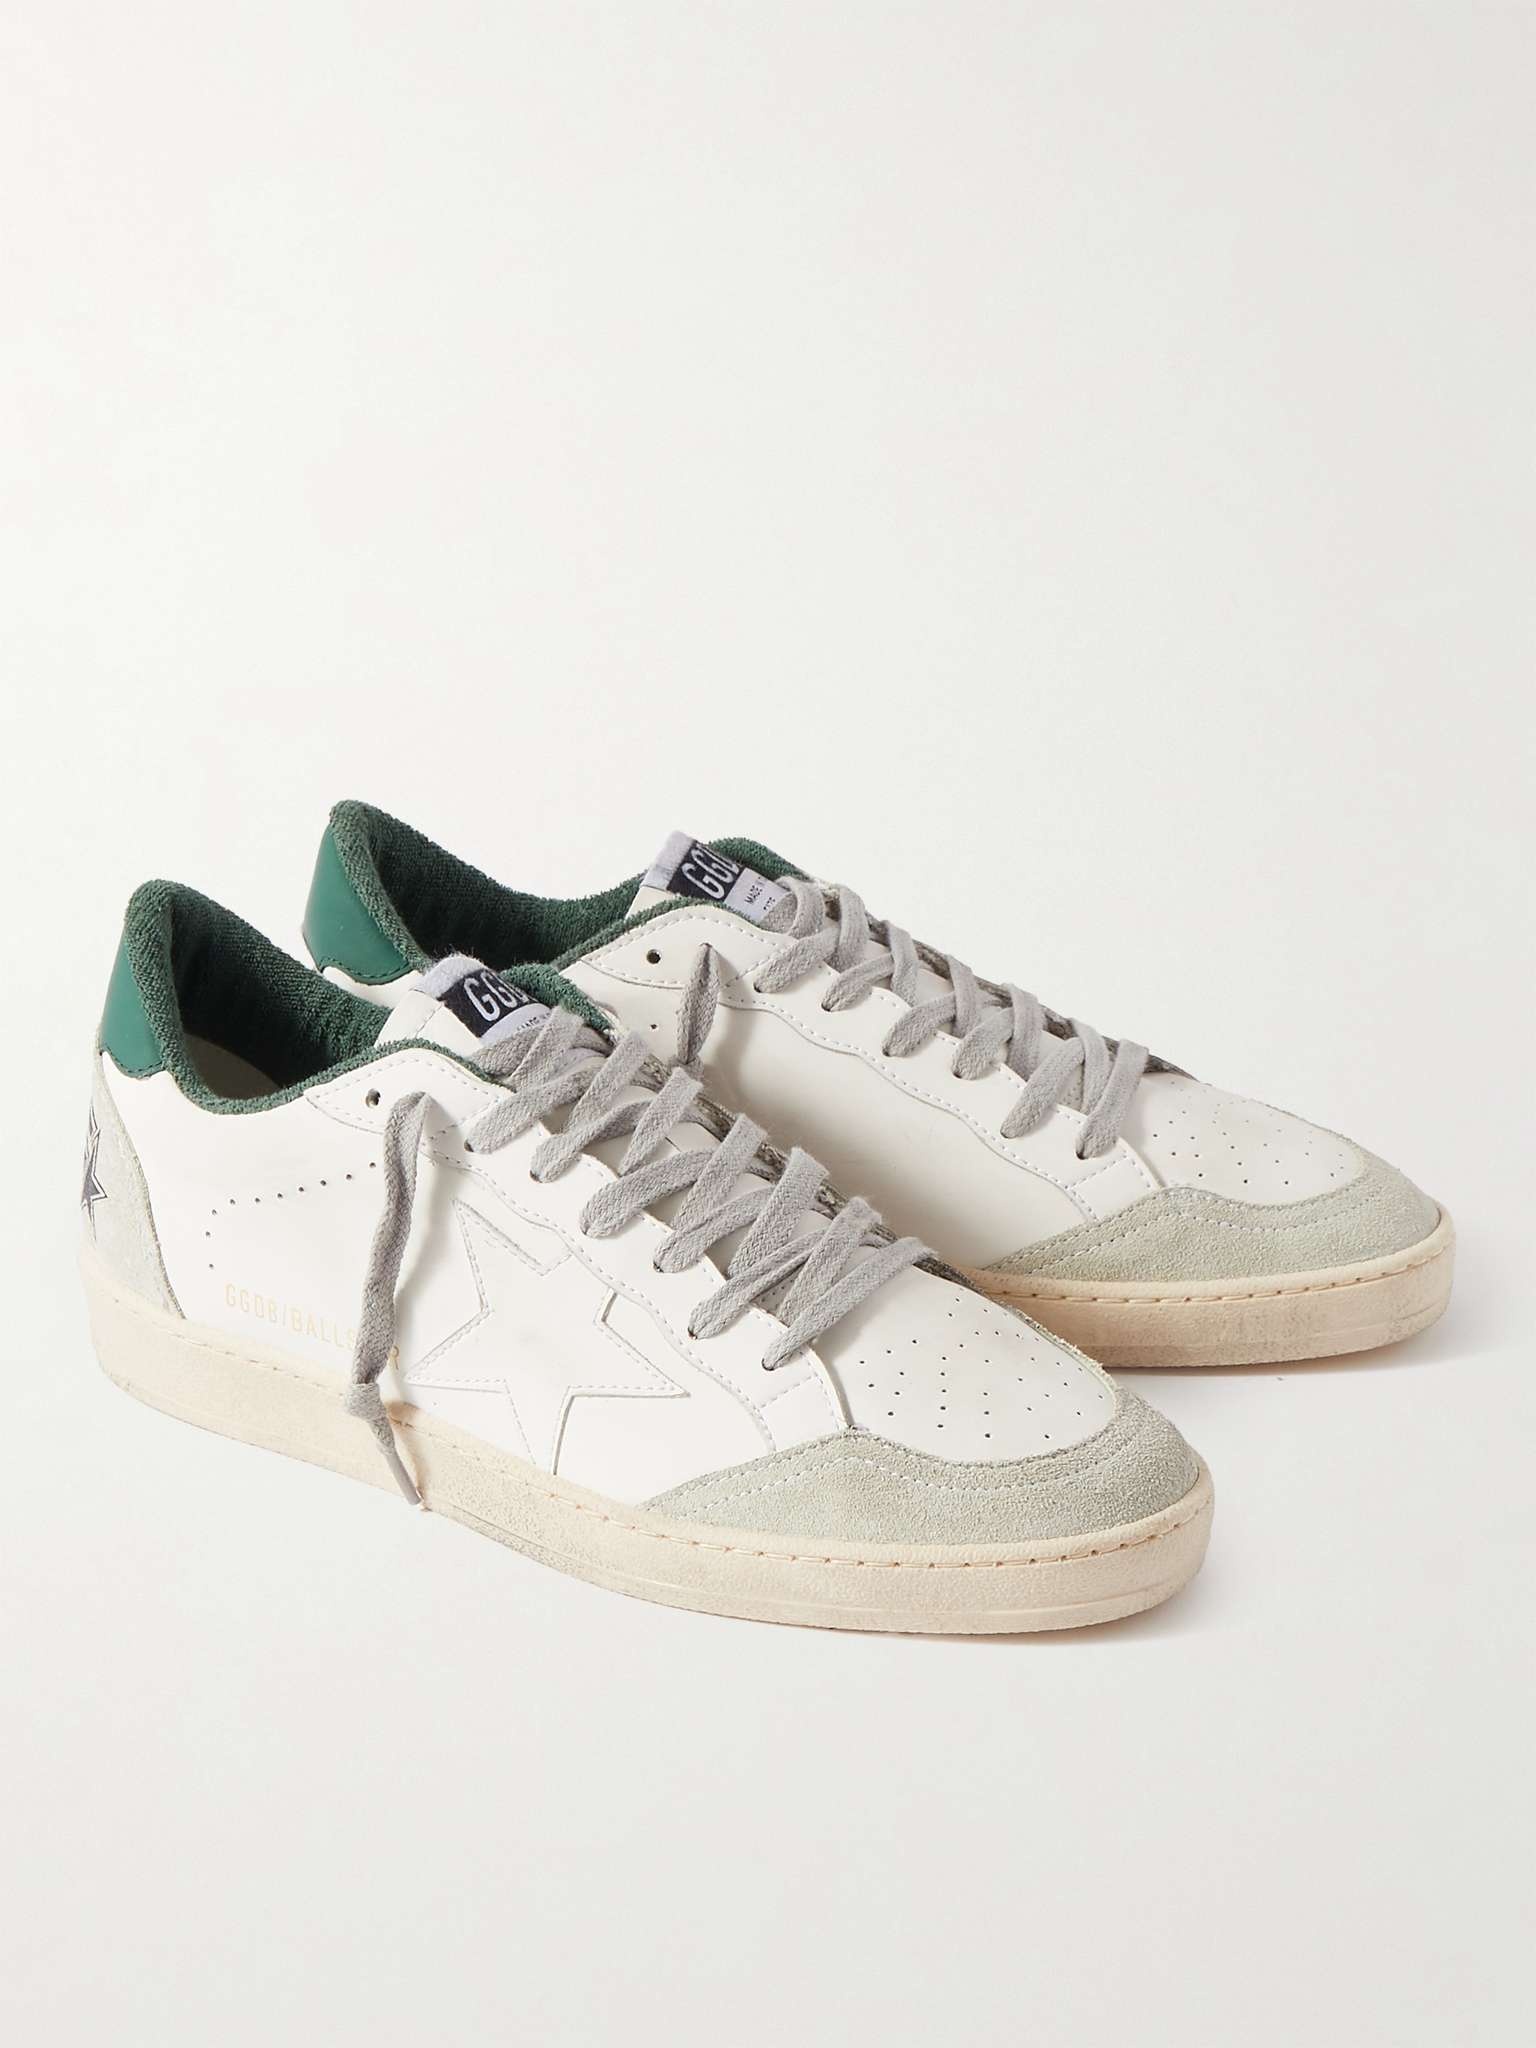 Ball Star Distressed Suede-Trimmed Leather Sneakers - 4